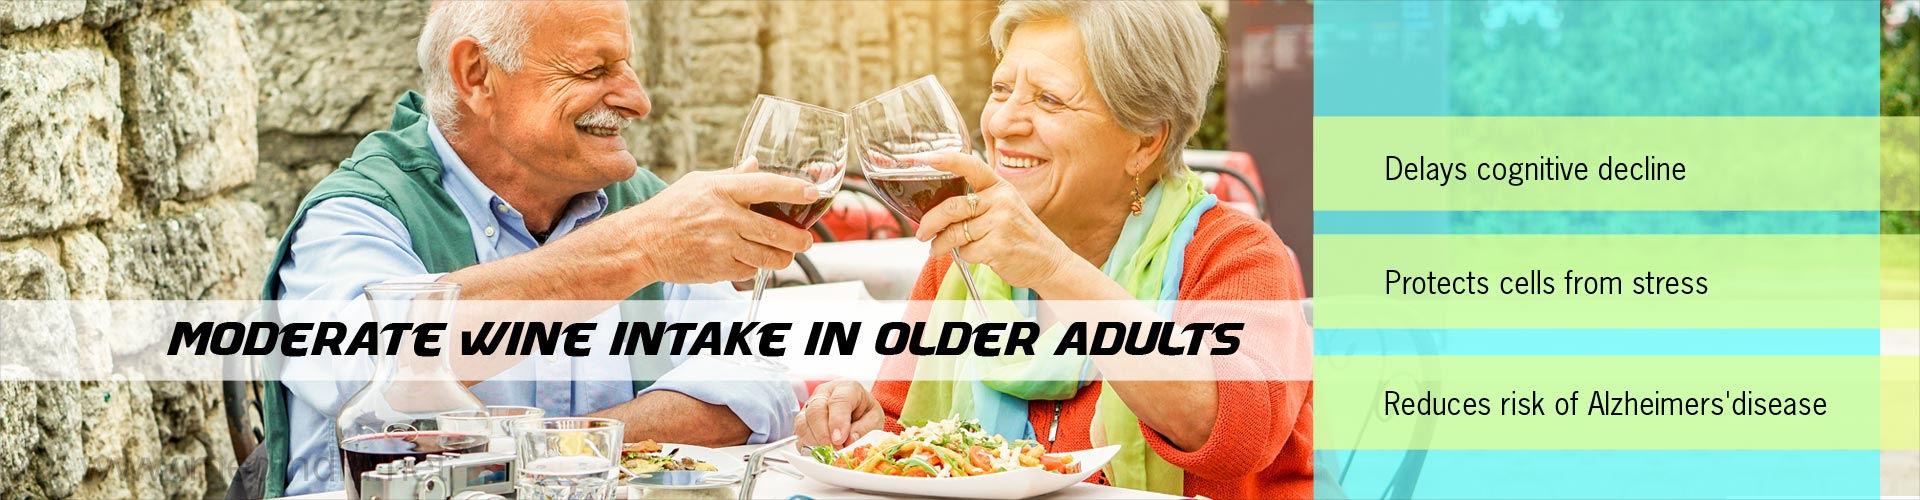 moderate wine intake in older adults
- delays cognitive decline
- protects cells from stress
- reduces risk of alzheimer''s disease